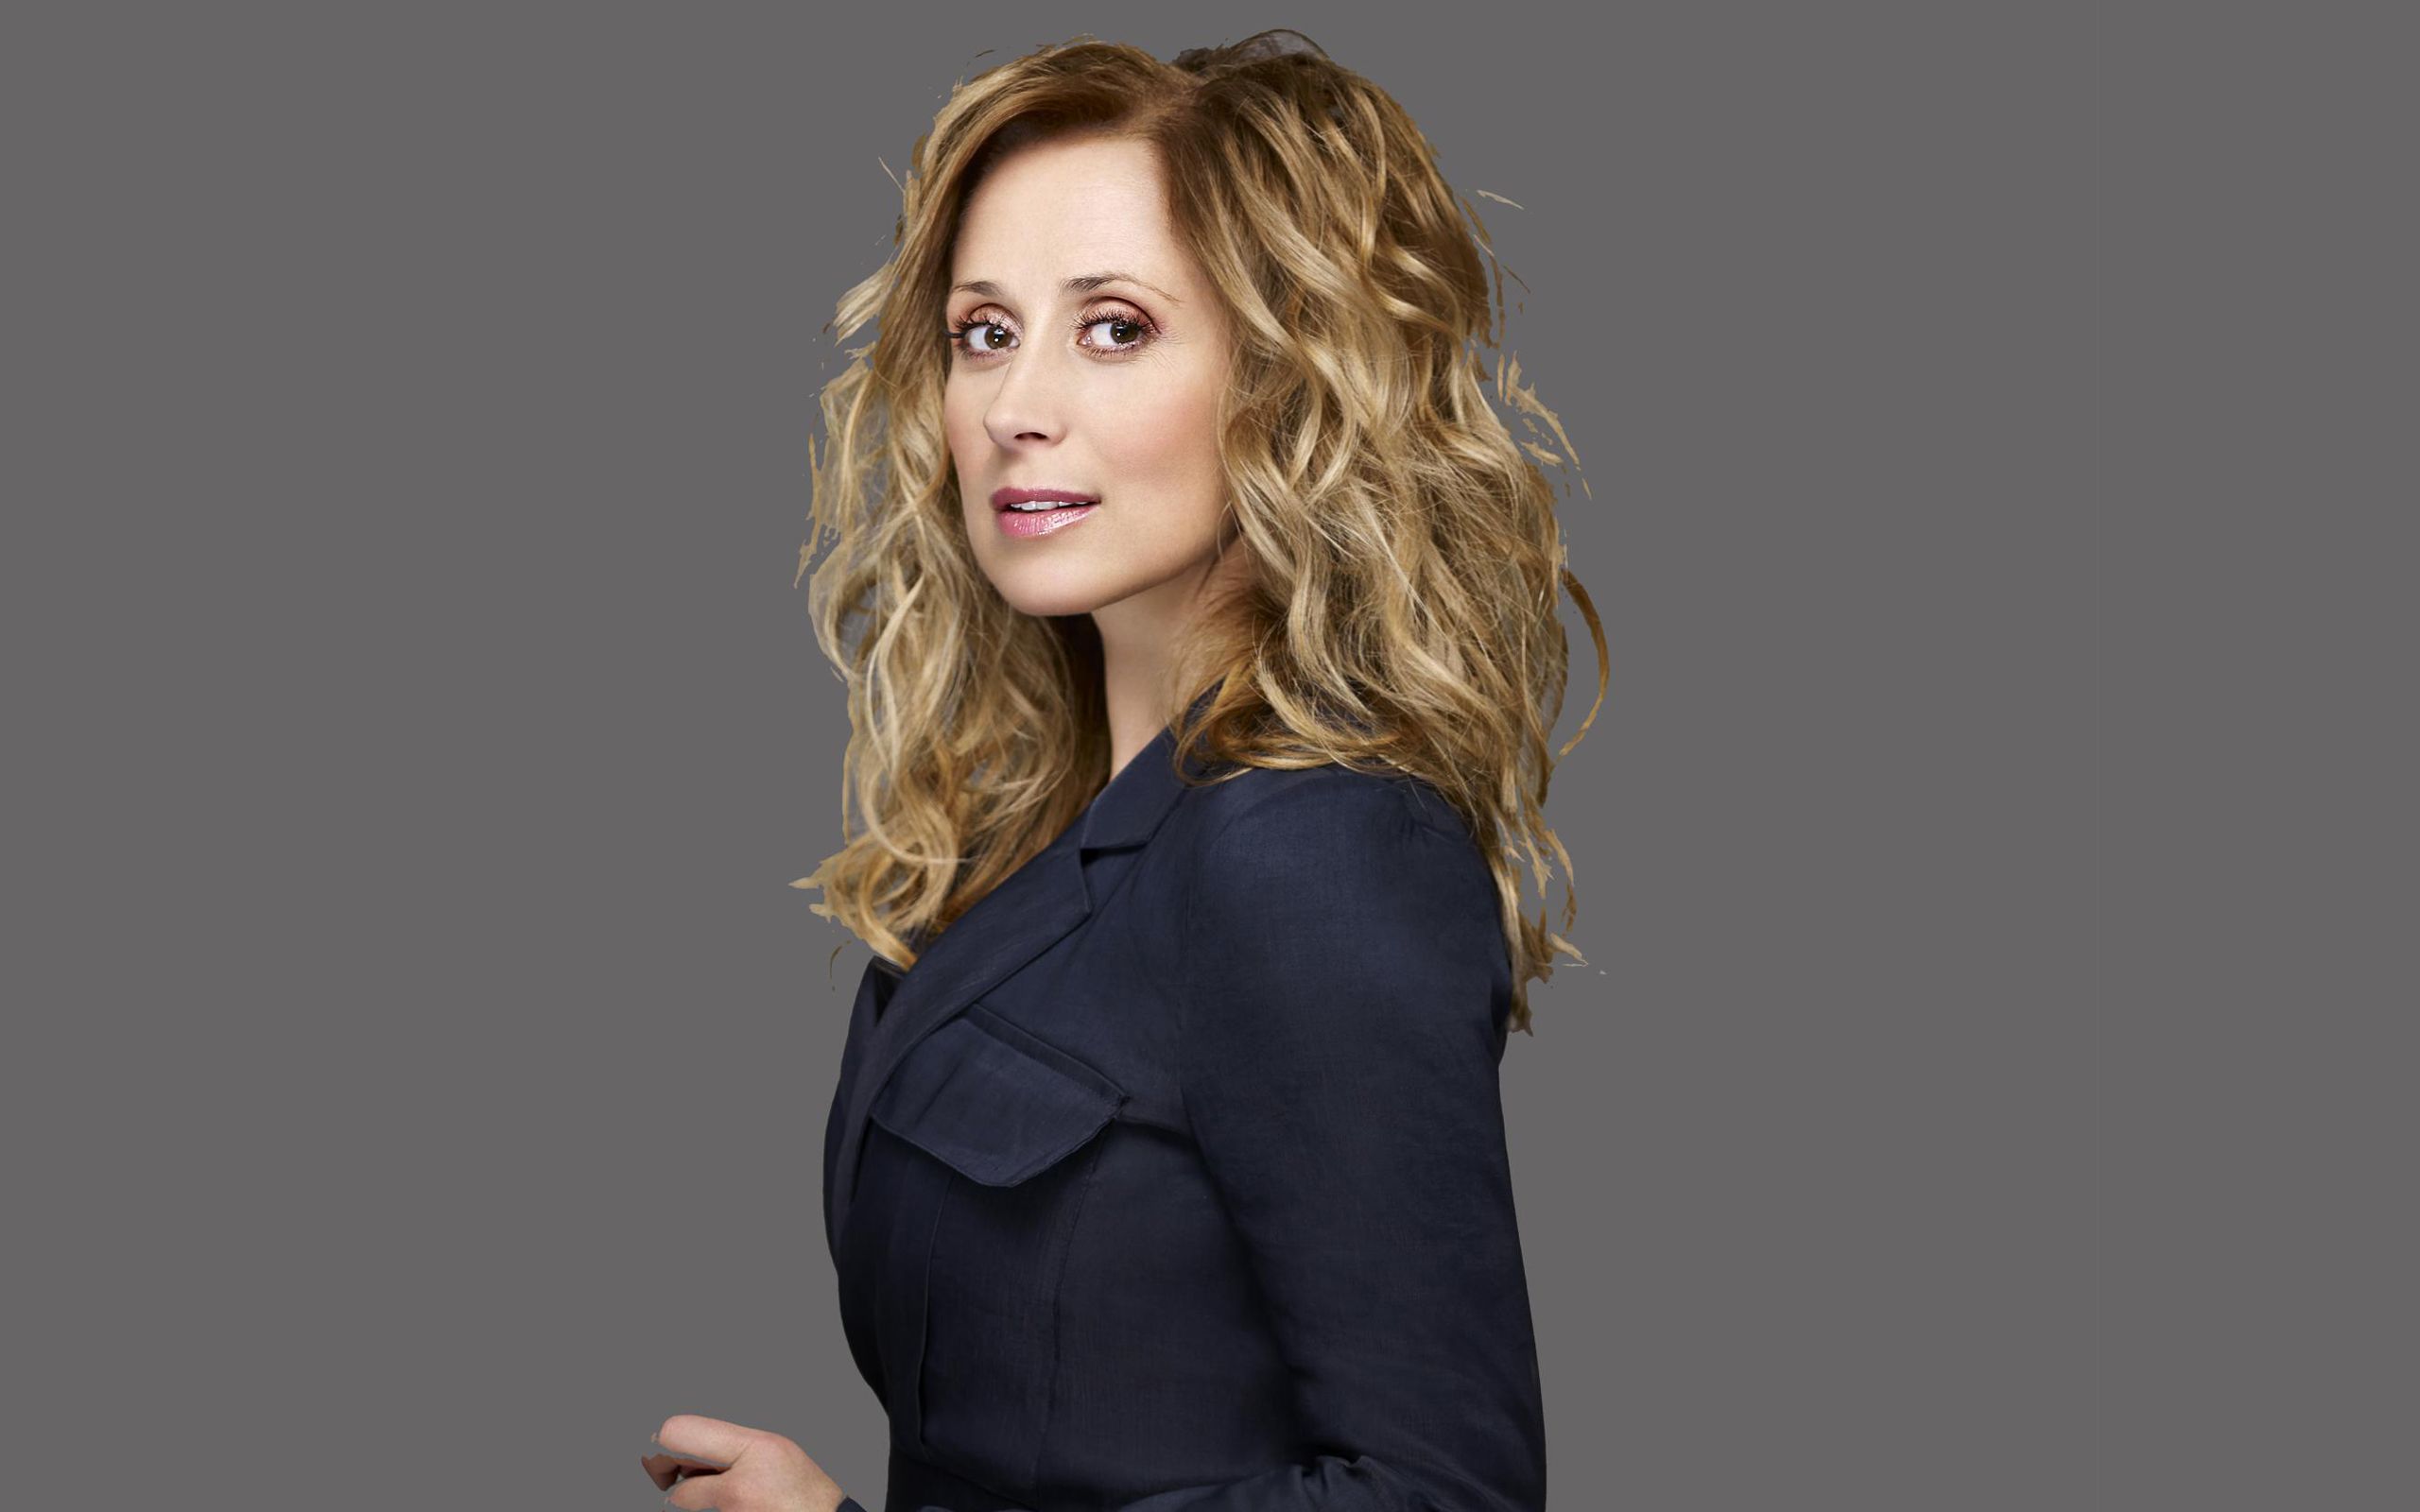 Download Wallpaper Lara Fabian, Canadian Singer, Blonde, Beautiful Woman, Portrait, Smile, Make Up For Desktop With Resolution 2560x1600. High Quality HD Picture Wallpaper